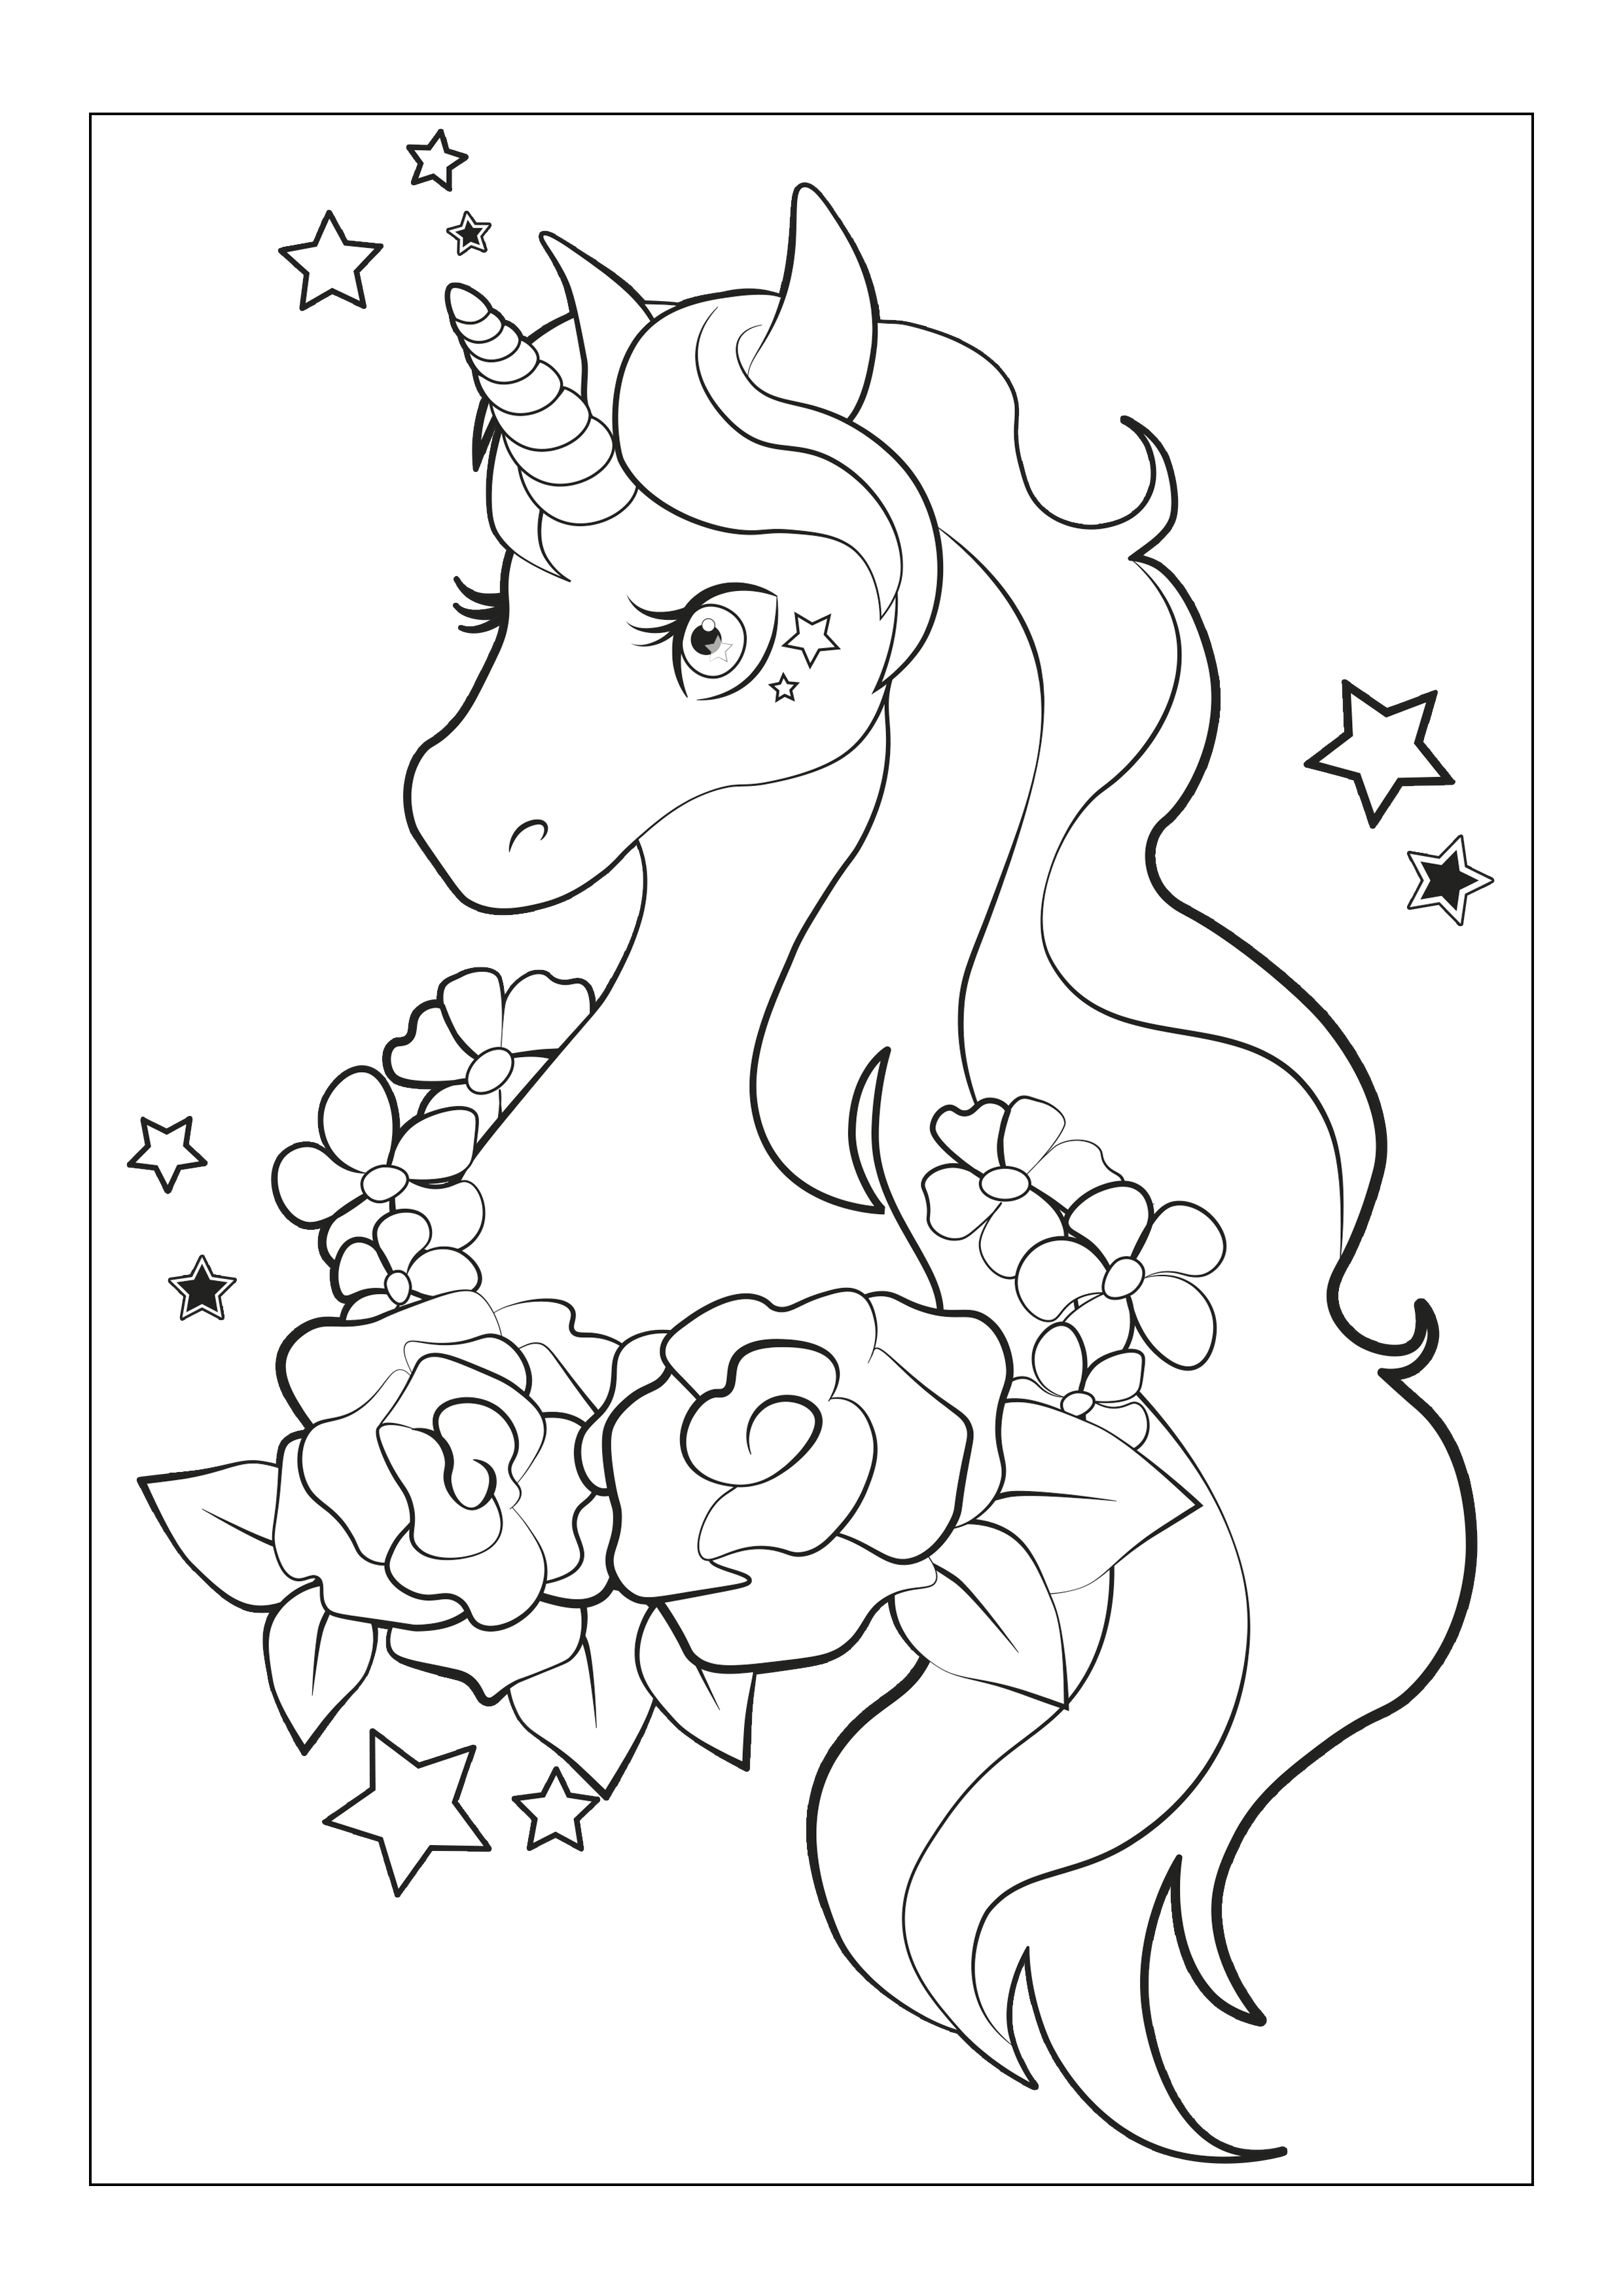 Free Online Coloring Pages For Girls